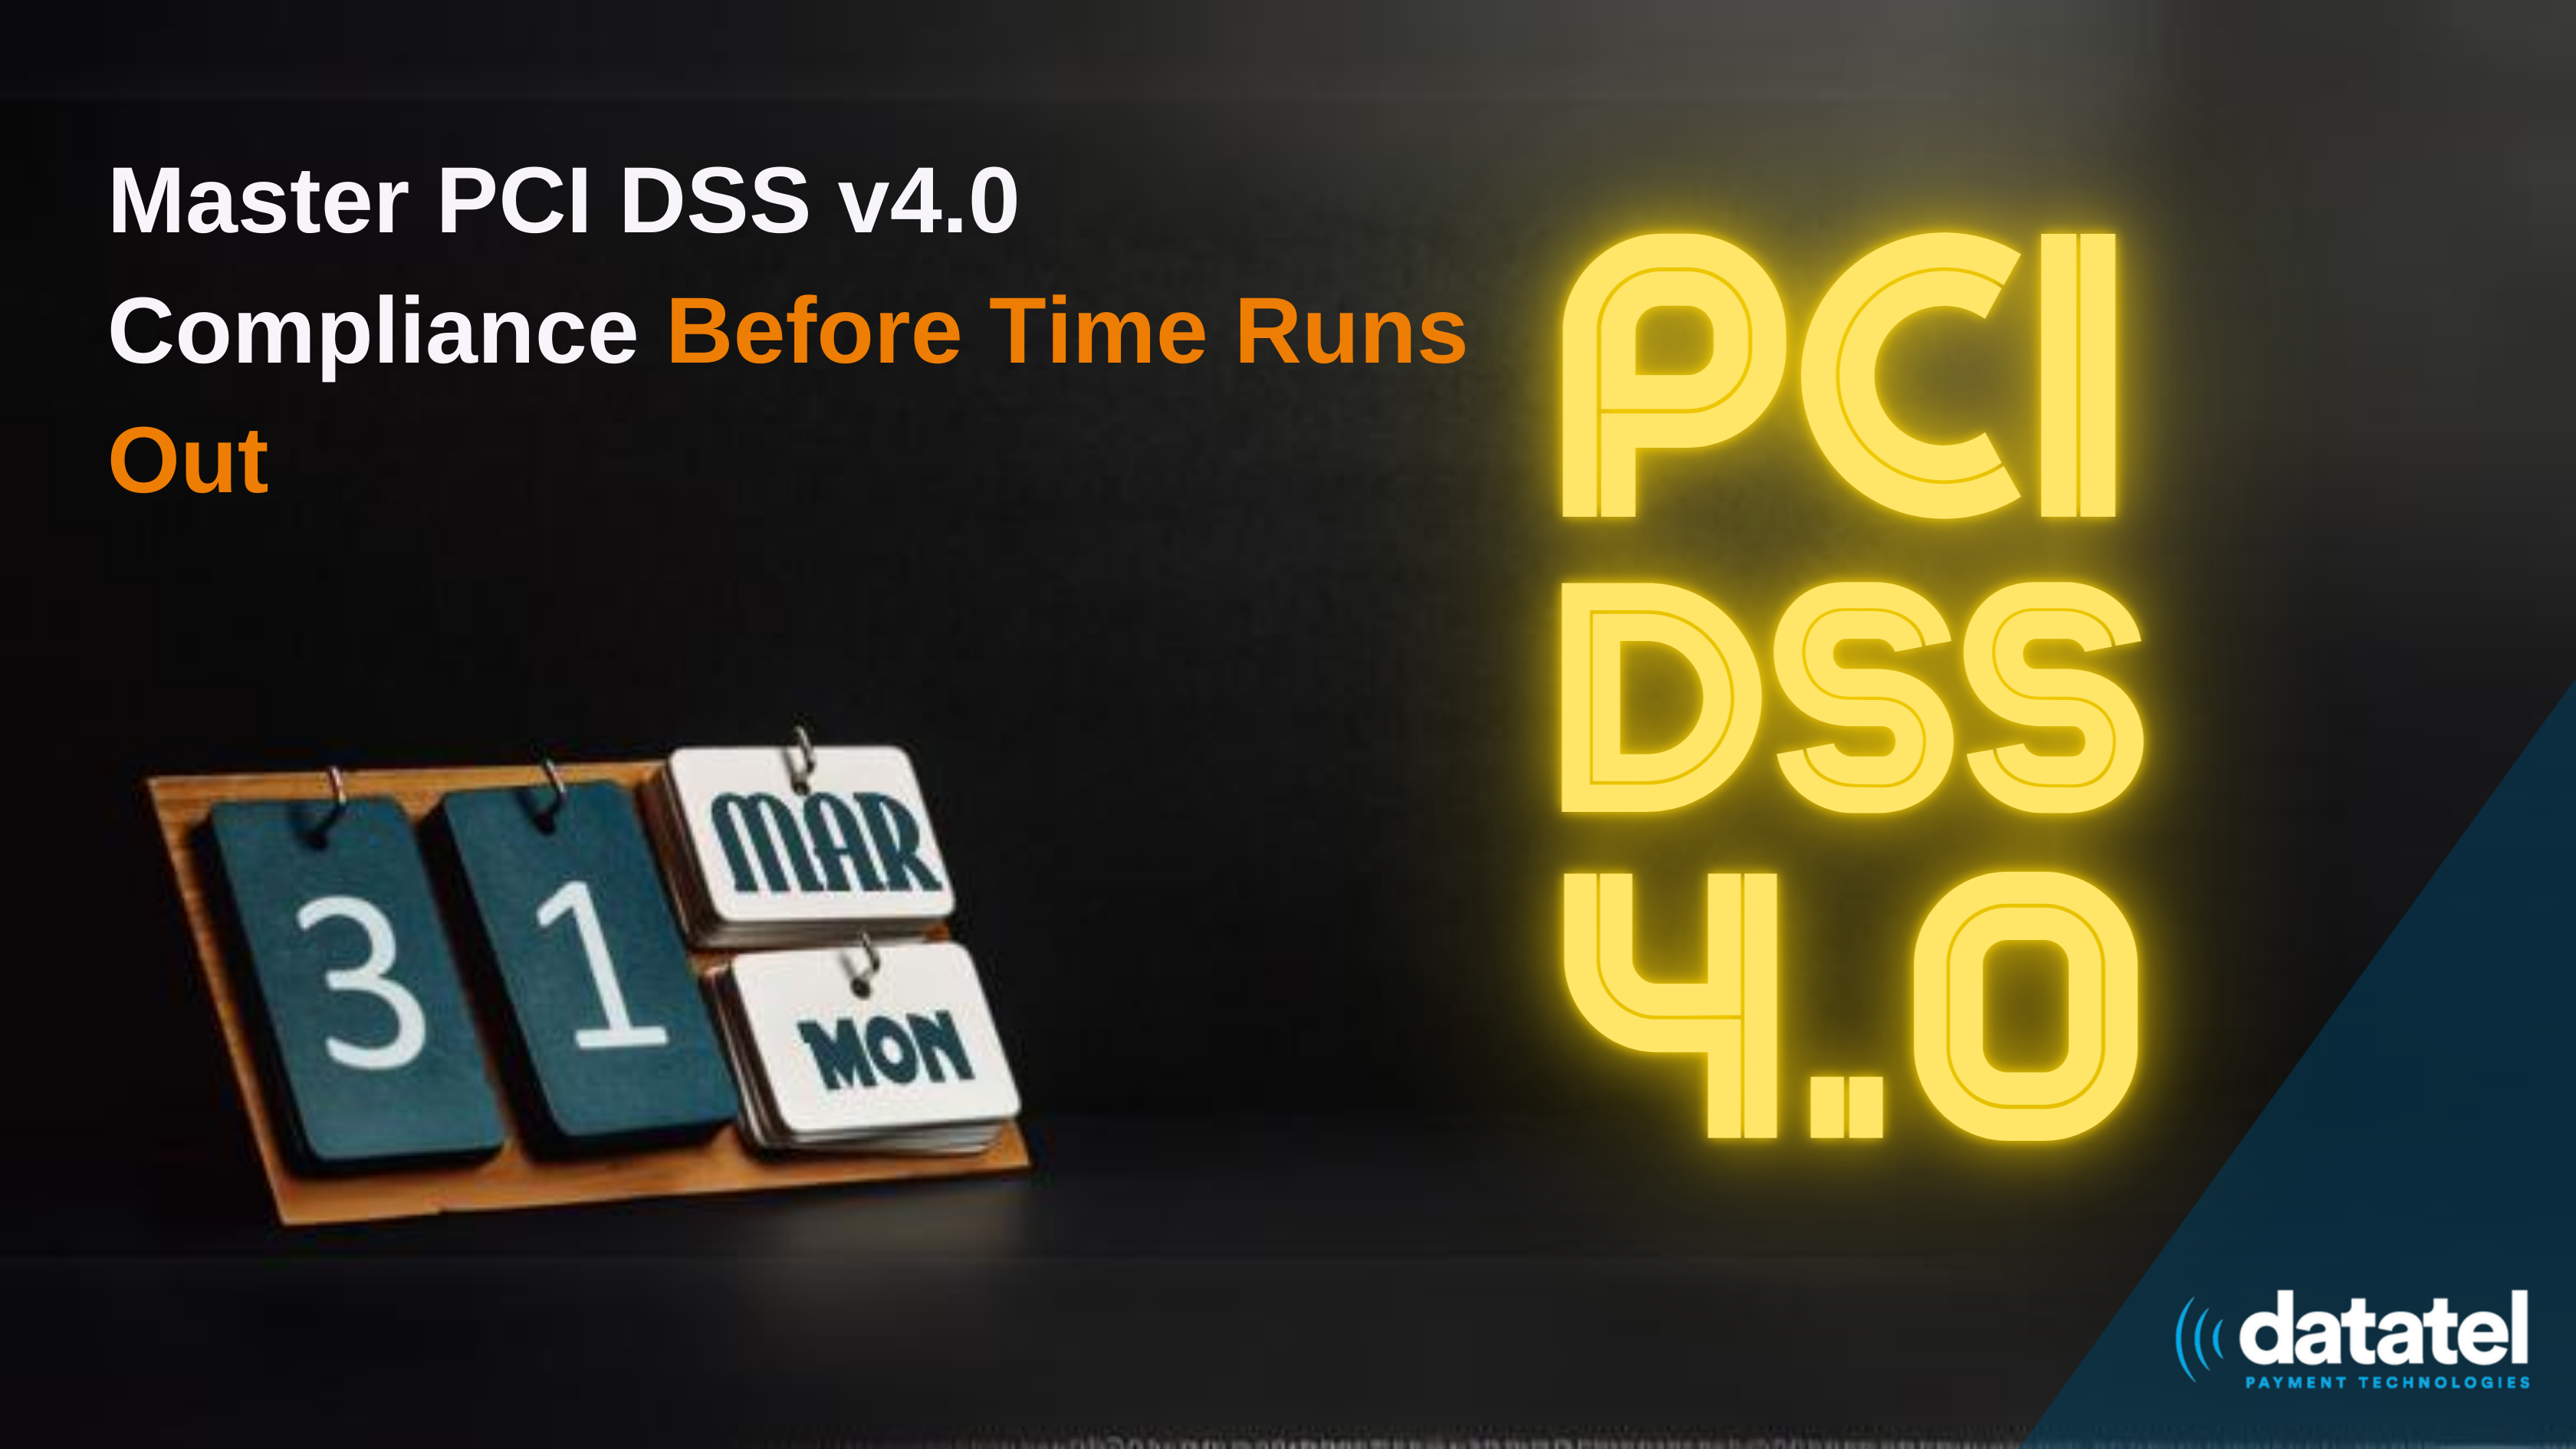 PCI Clock is Ticking – Master PCI DSS v4.0 Compliance Before Time Runs Out 